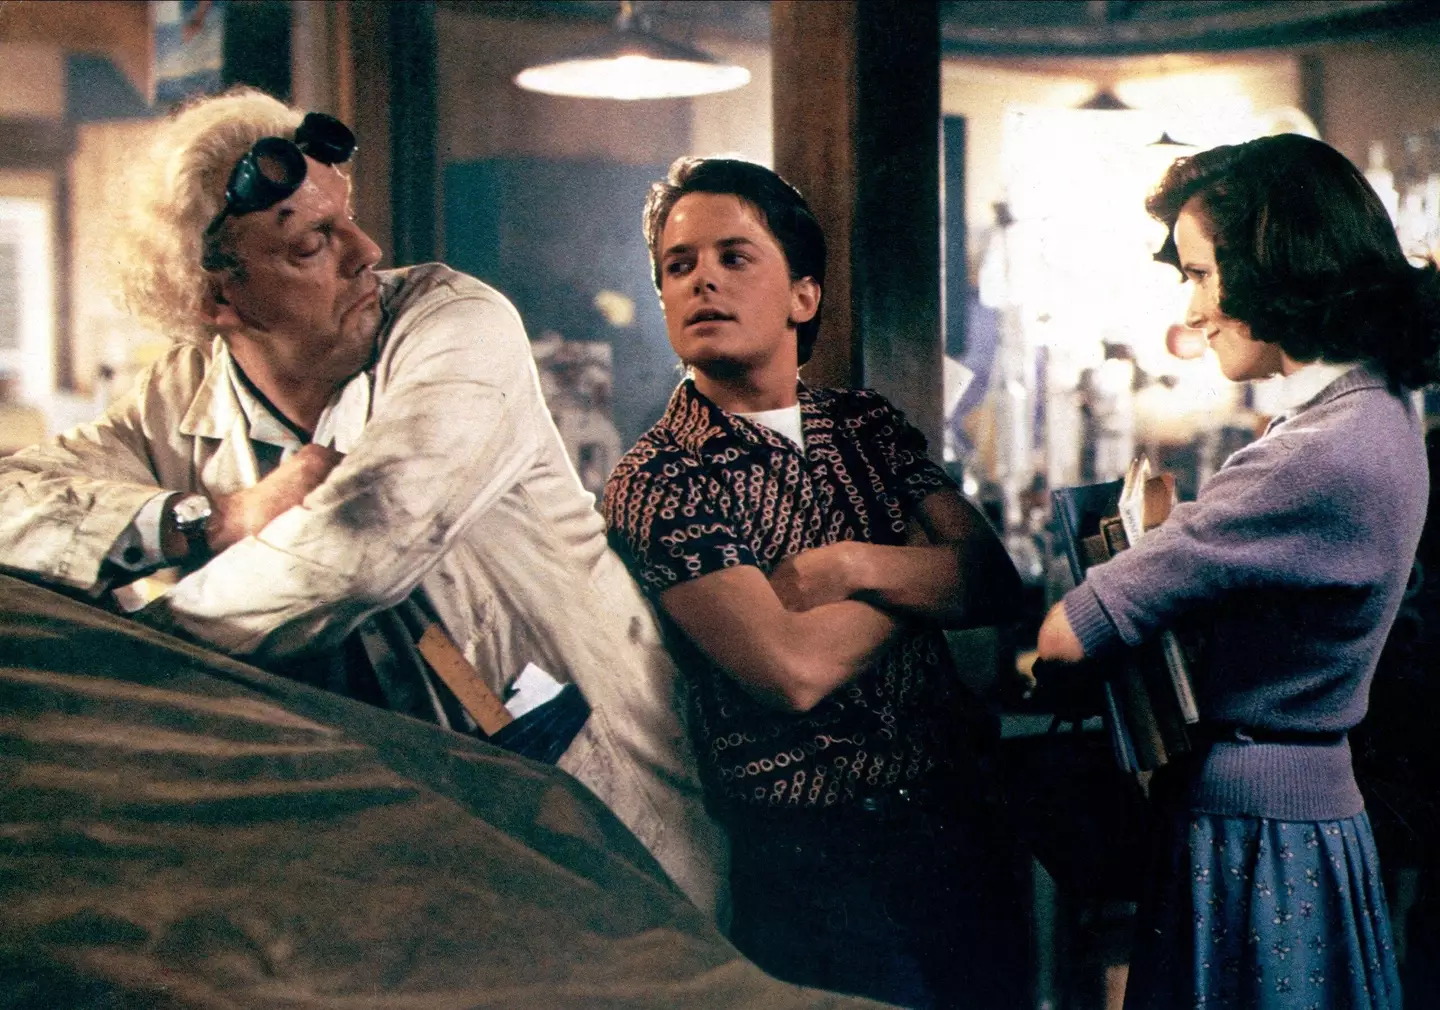 Christopher Lloyd, Michael J. Fox and Lea Thompson in Back To The Future, 1985.